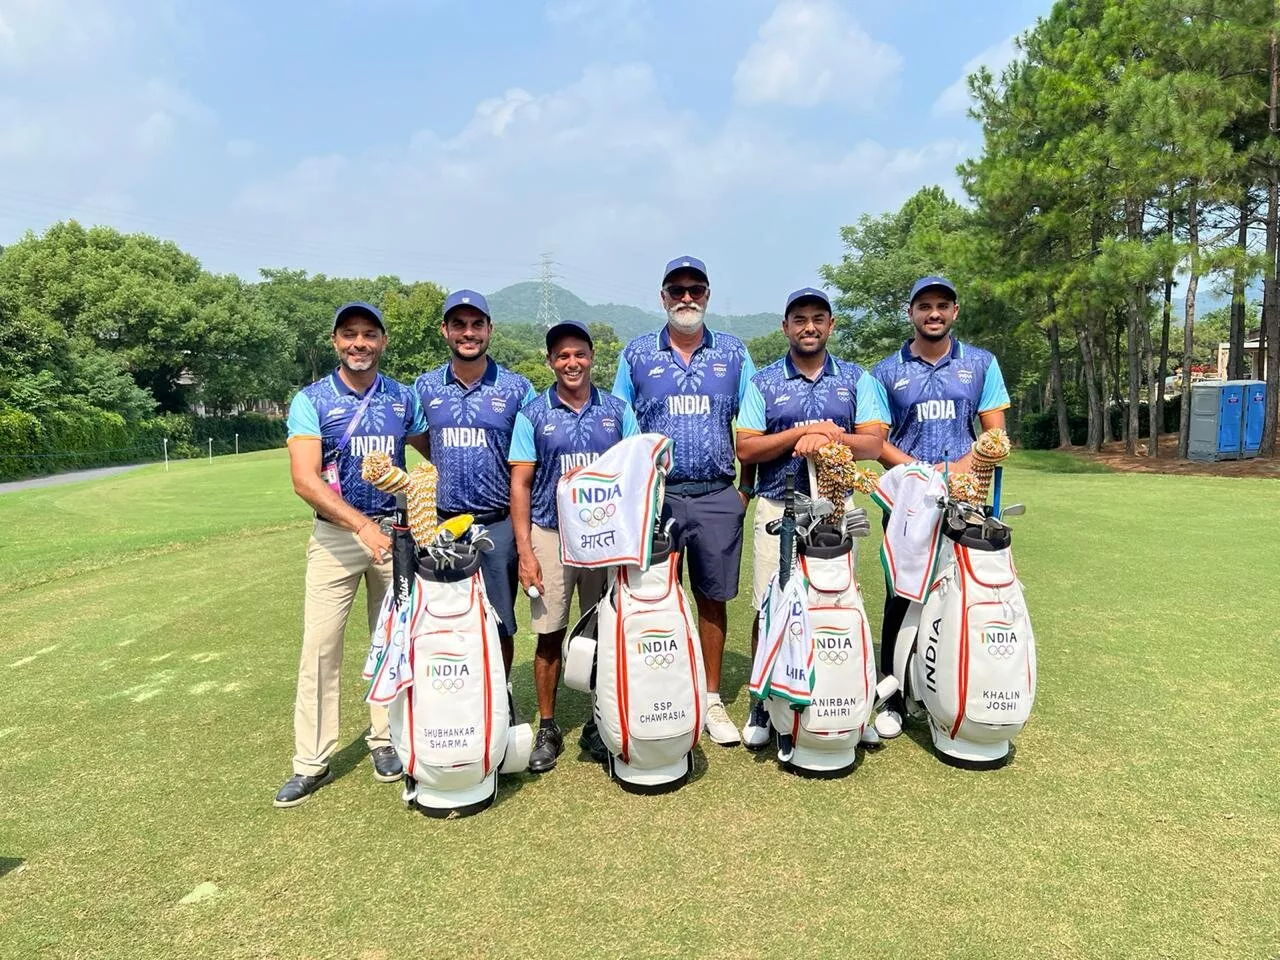 Indian golf team needs to click together for scripting podium finish at Hangzhou: Asian Games gold medallist Lakshman Singh